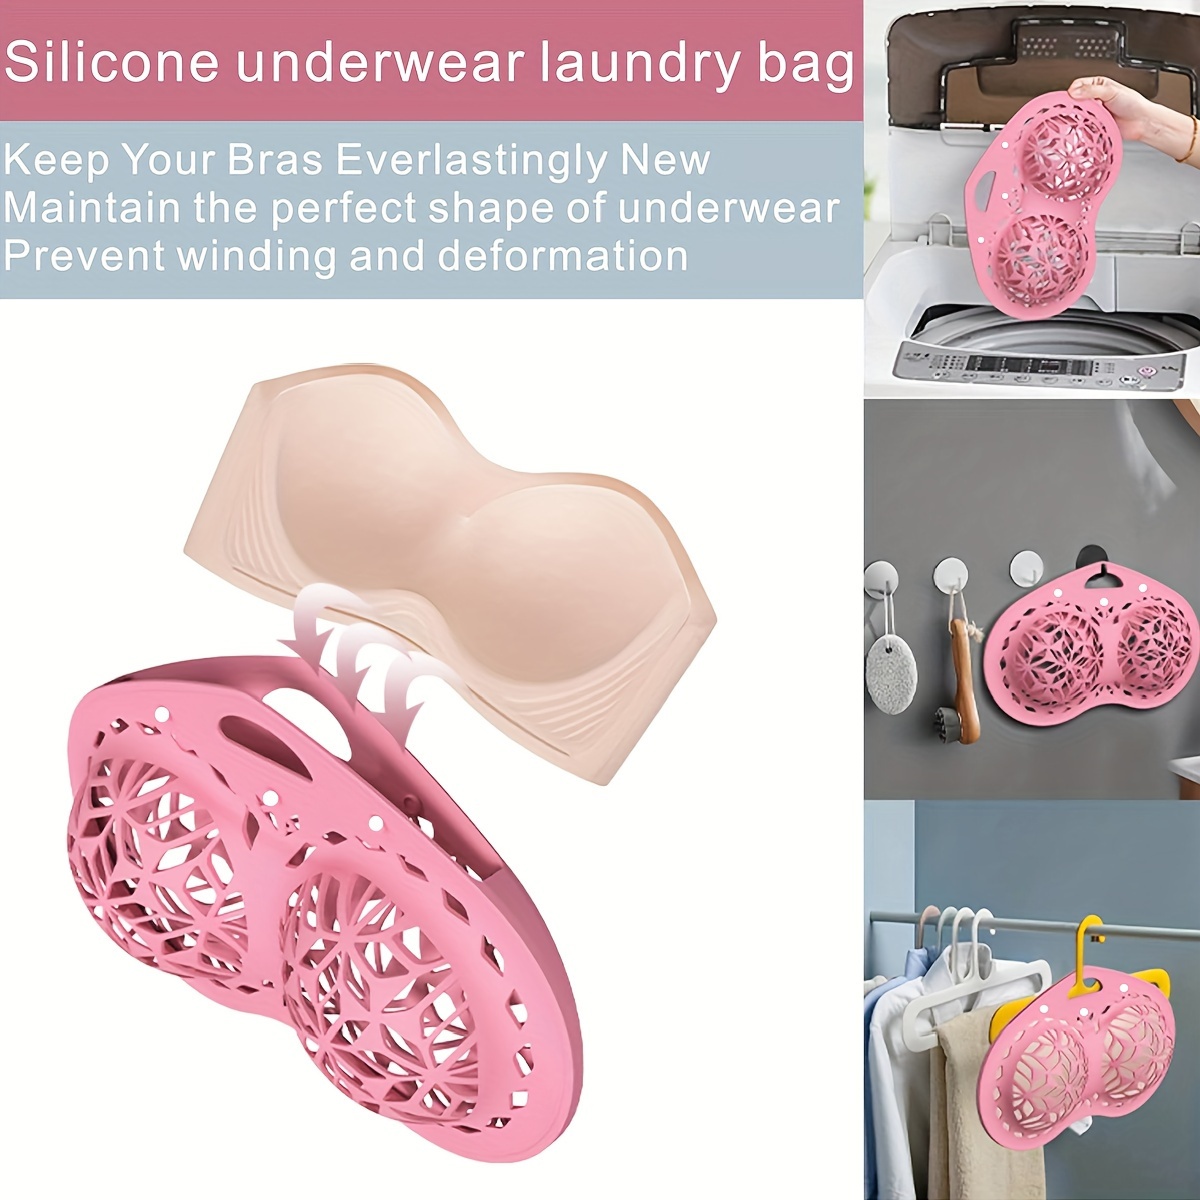 1pc Purple/Pink Silicon Bra Washing Bag, Anti-Deformation Laundry Bag For  Delicate Bra And Protect Underwear In Dryer, Lingerie Protector